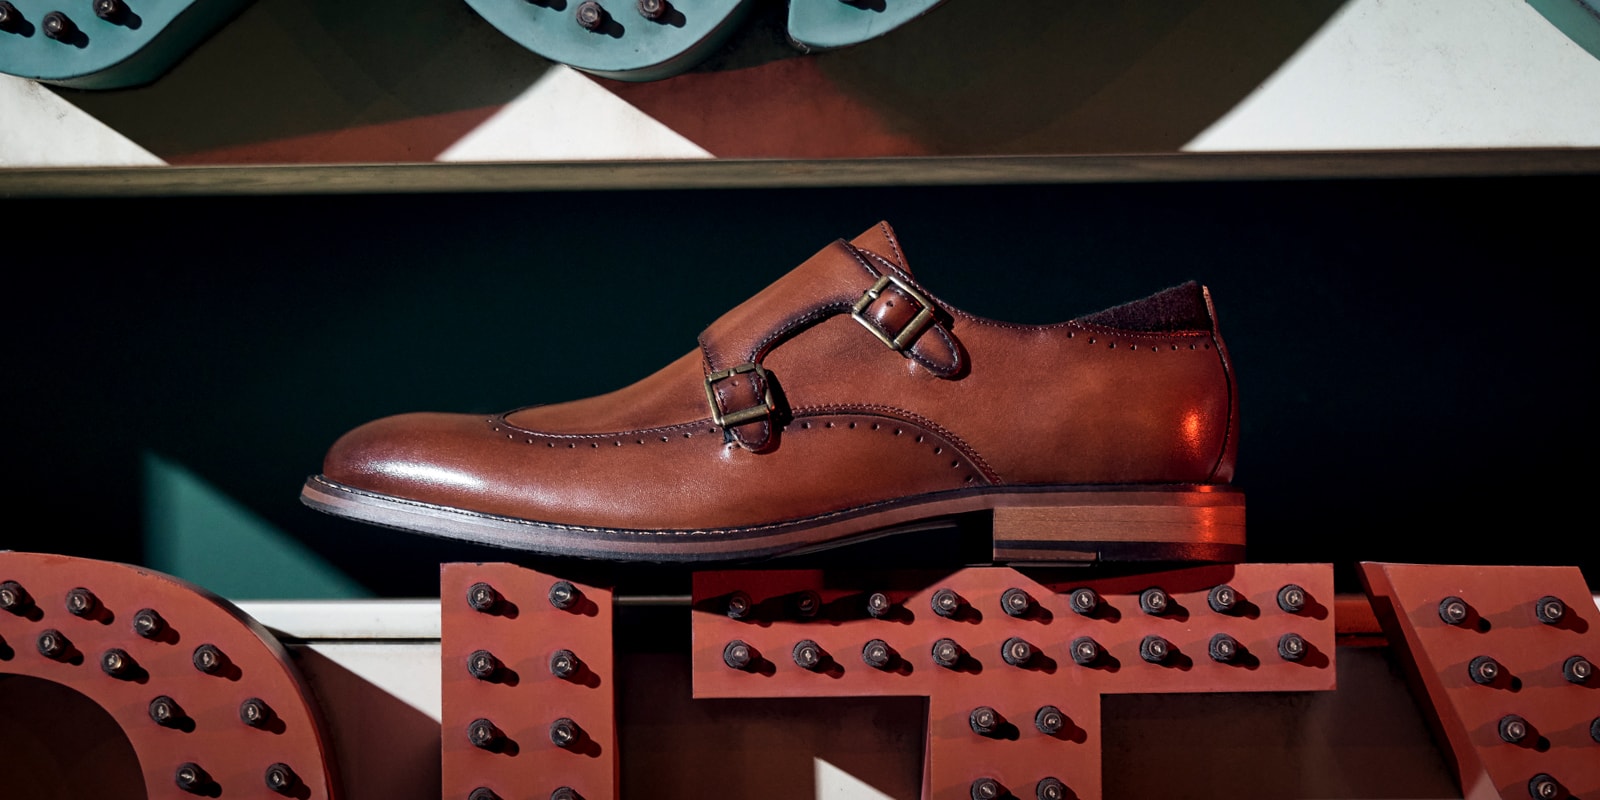 The featured image is the Farwell Wingtip Double Monk Strap in Cognac.